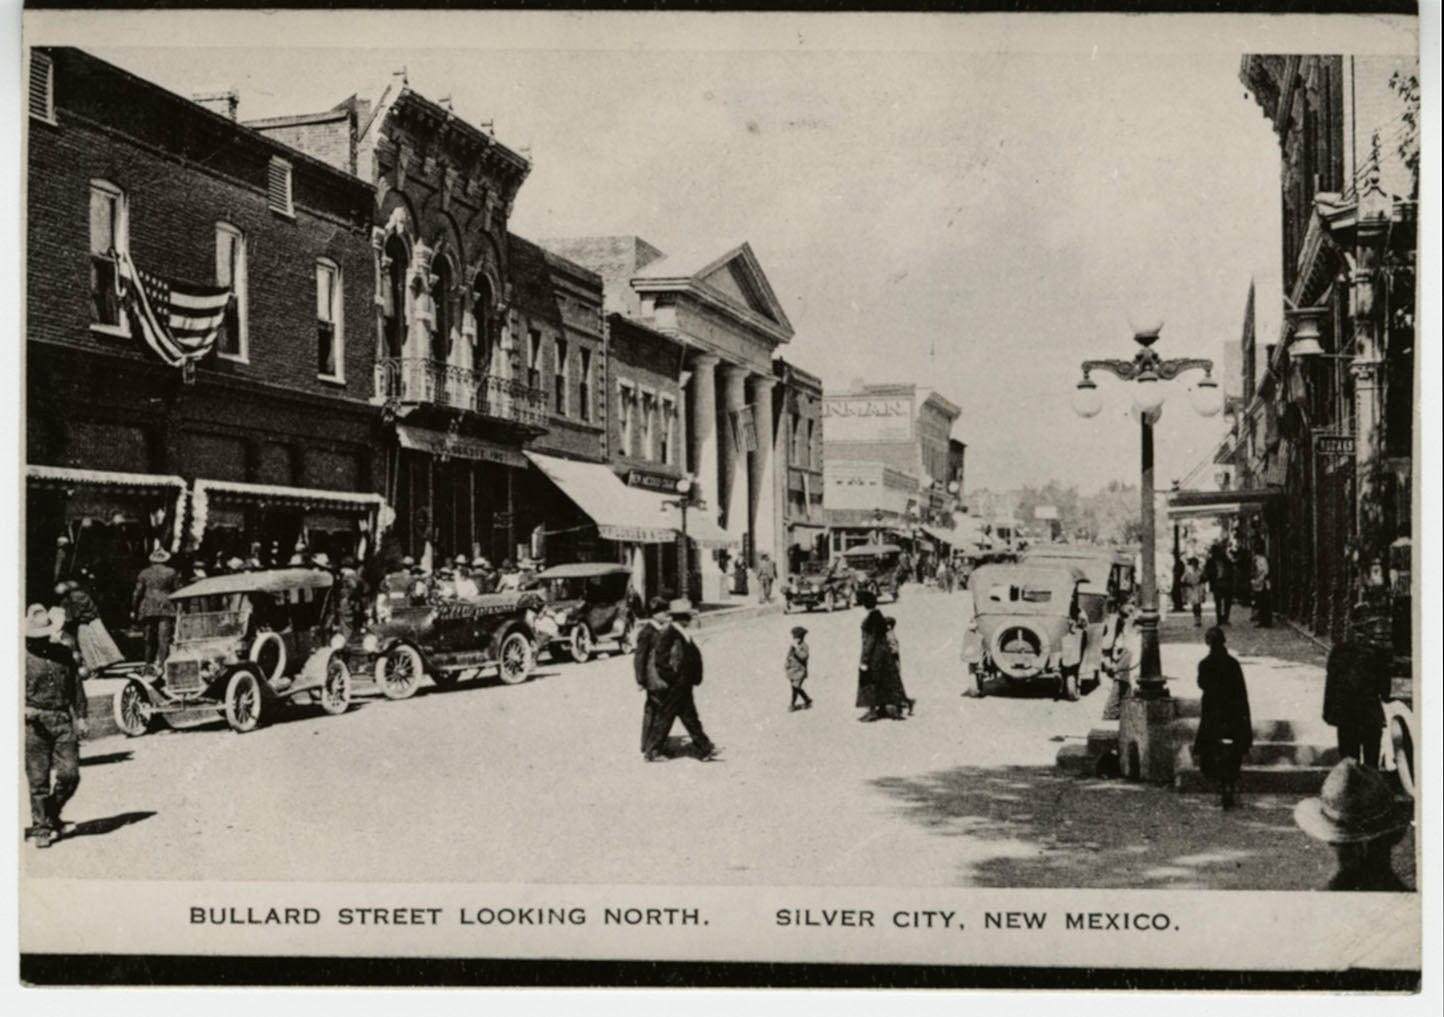 Silver City's Bullard Street in the late 1910s looking north from the corner of Bullard and Broadway streets.